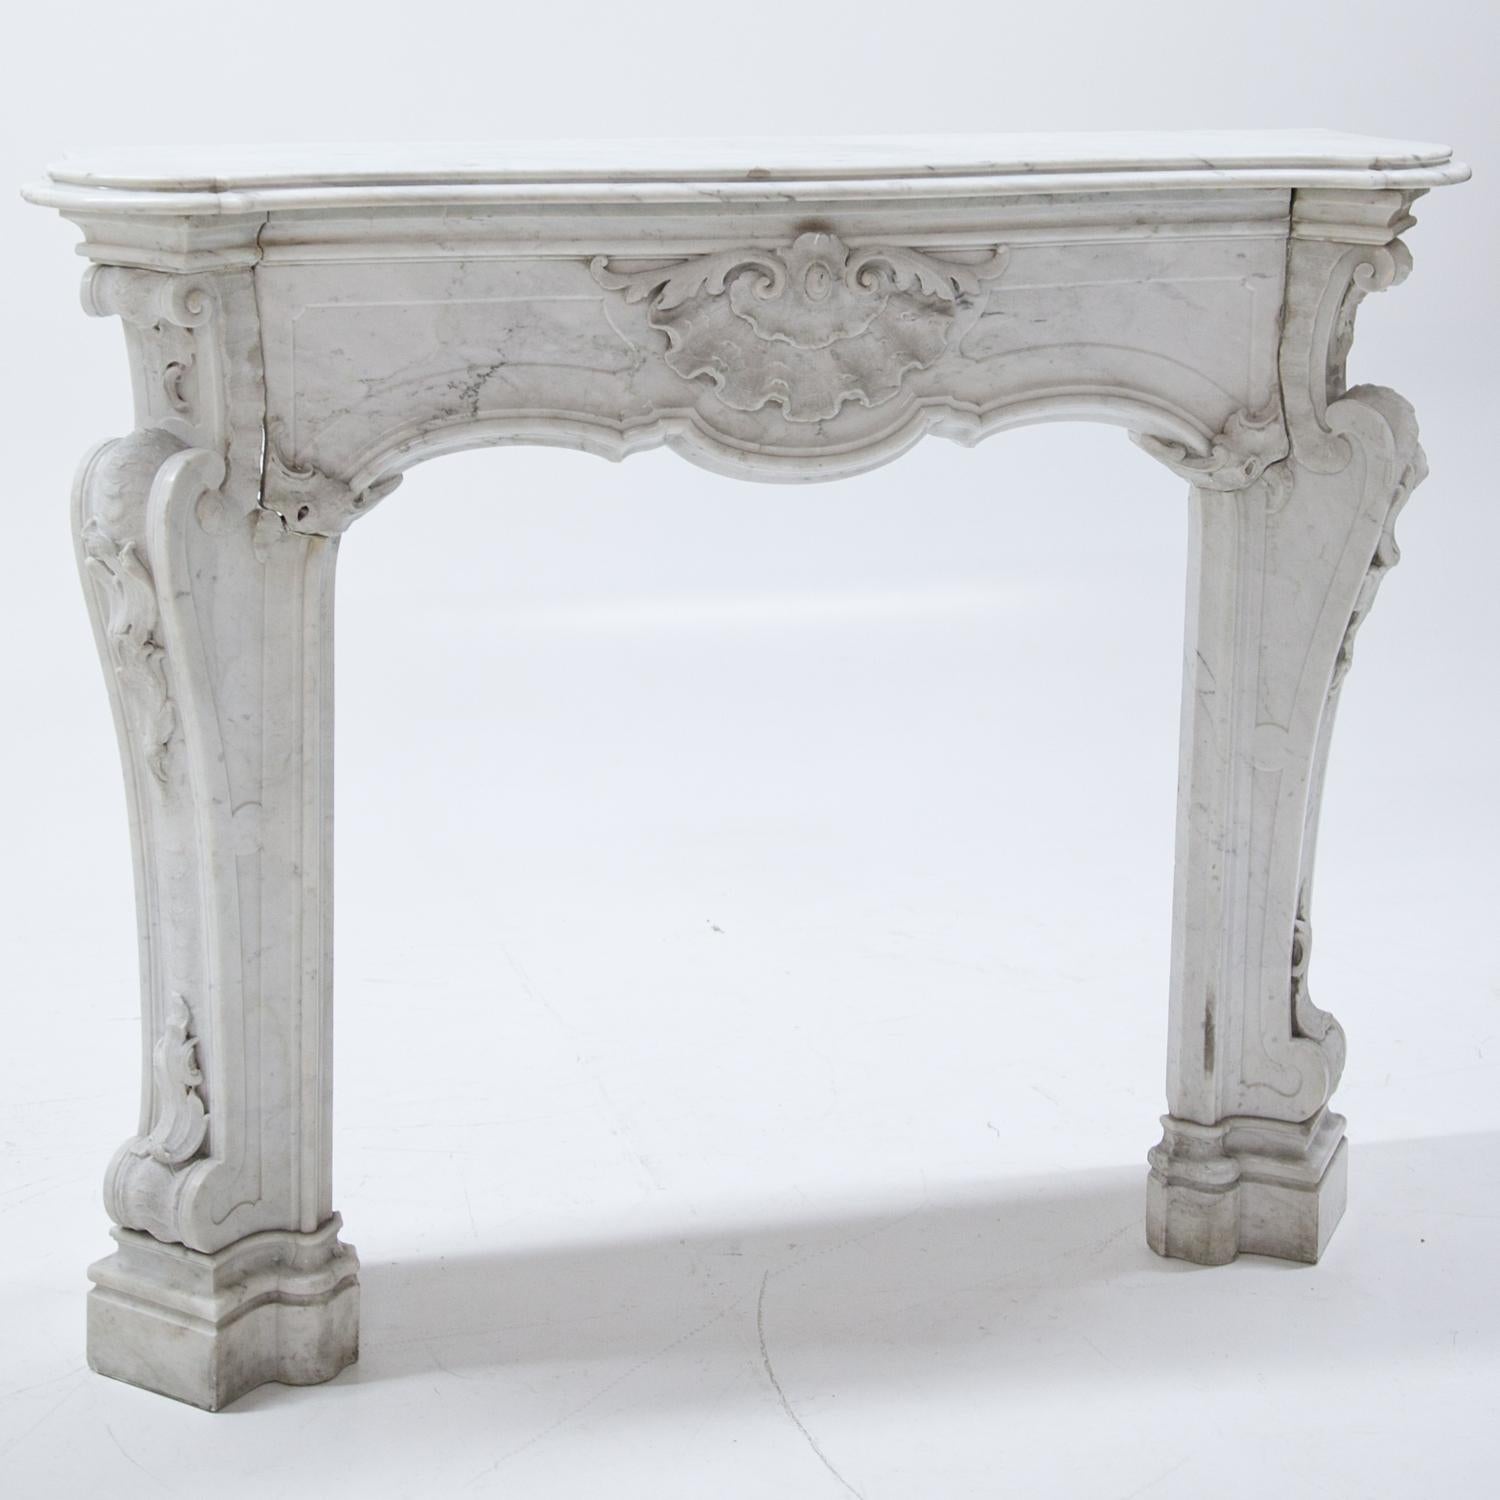 Baroque style mantel piece out of polished white marble with grey veins. The mantel is decorated with volute und leaf decor as well as a large shell ornament in the middle. The sides are at an angle and stand on profiled bases. Inner Measurements: